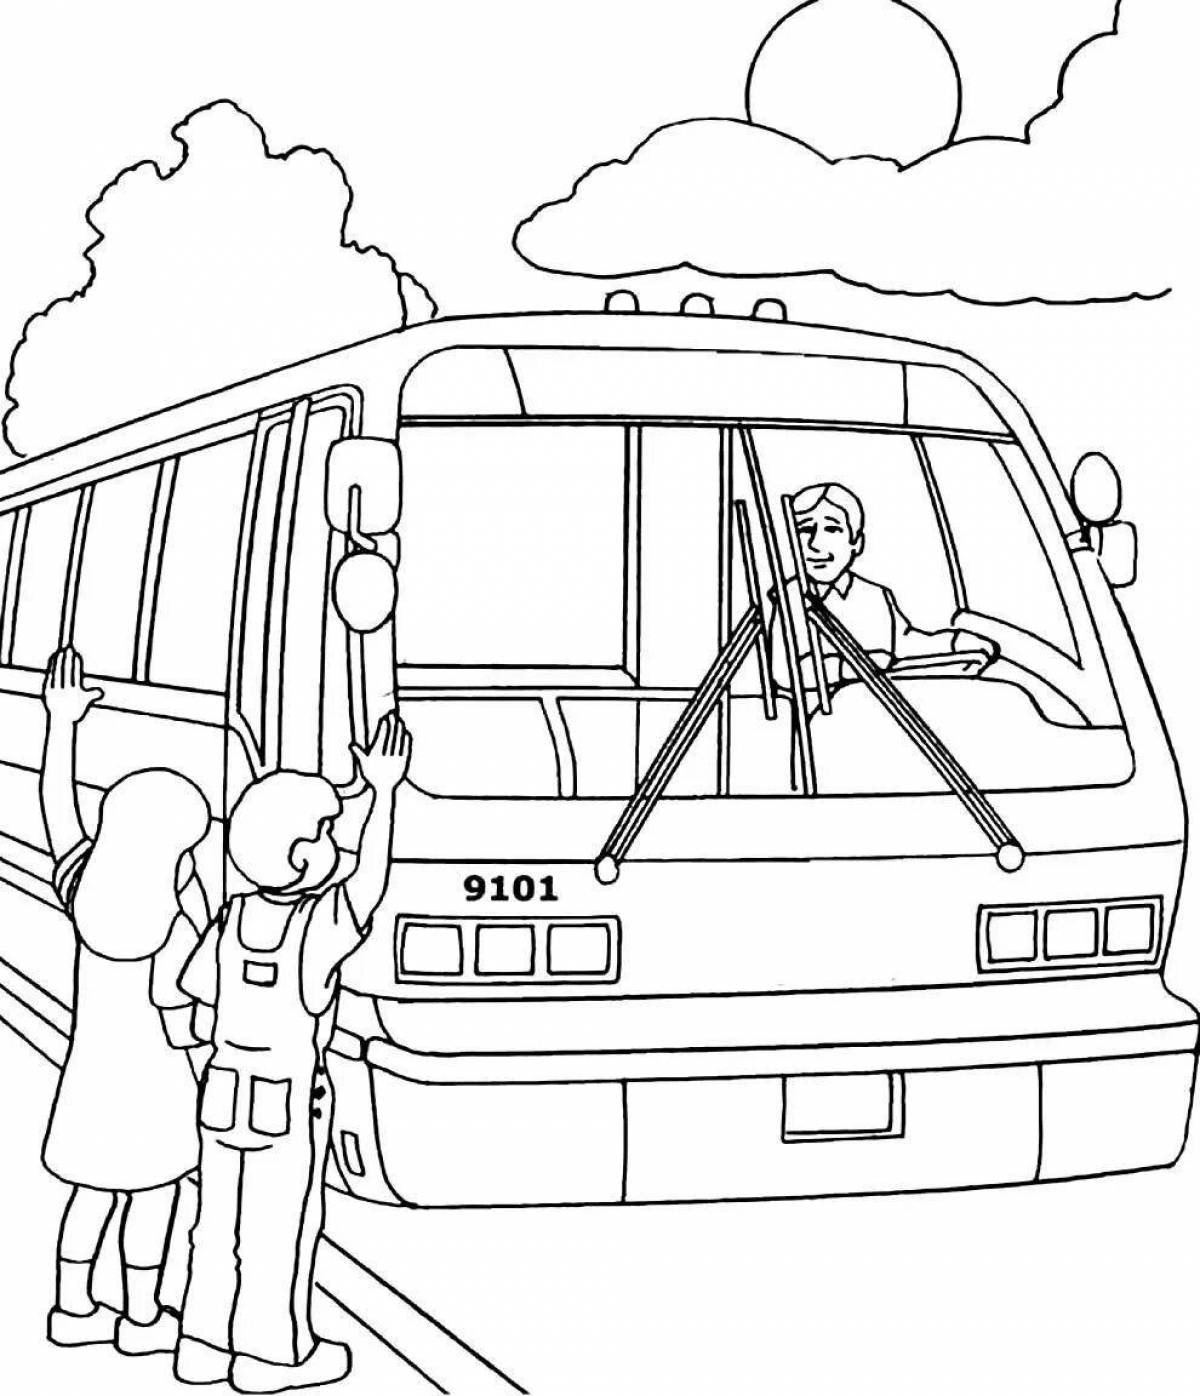 Delivery truck driver coloring page